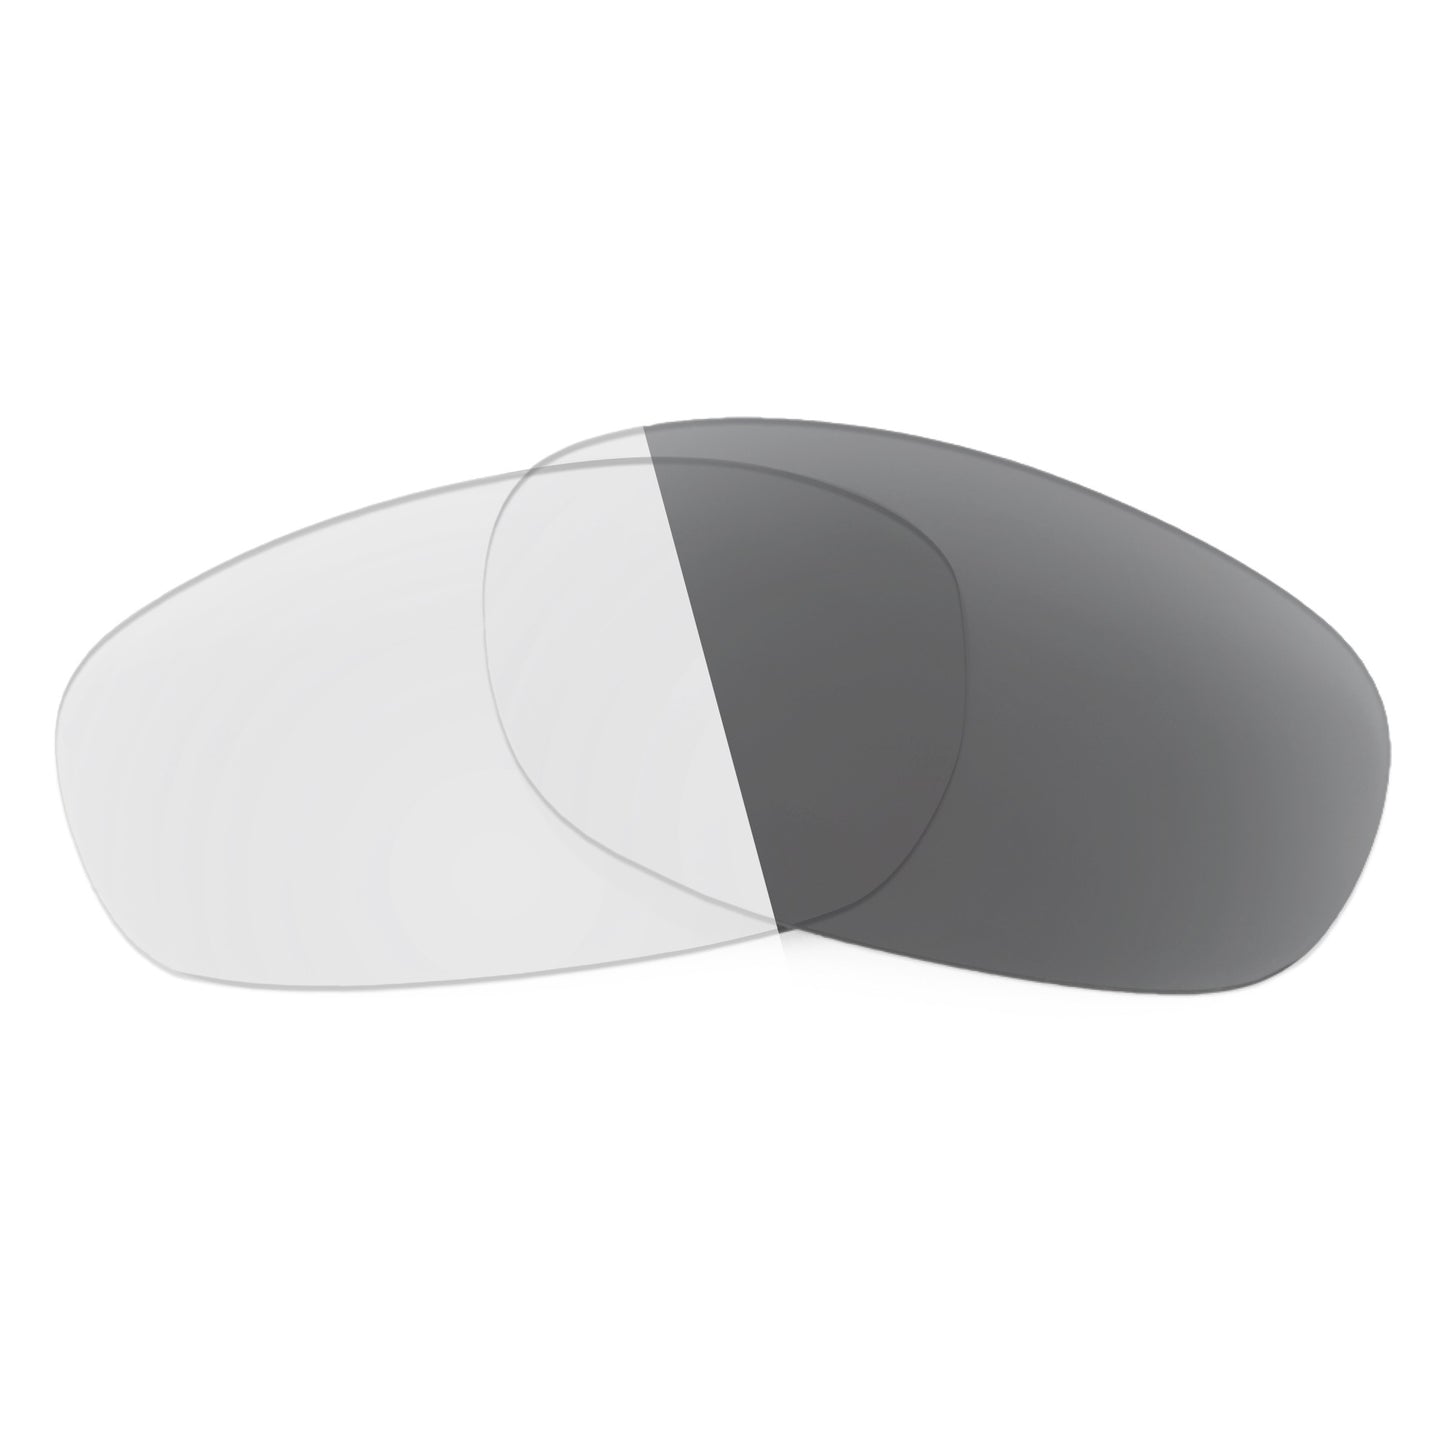 Revant replacement lenses for Wiley X Reign Non-Polarized Adapt Gray Photochromic